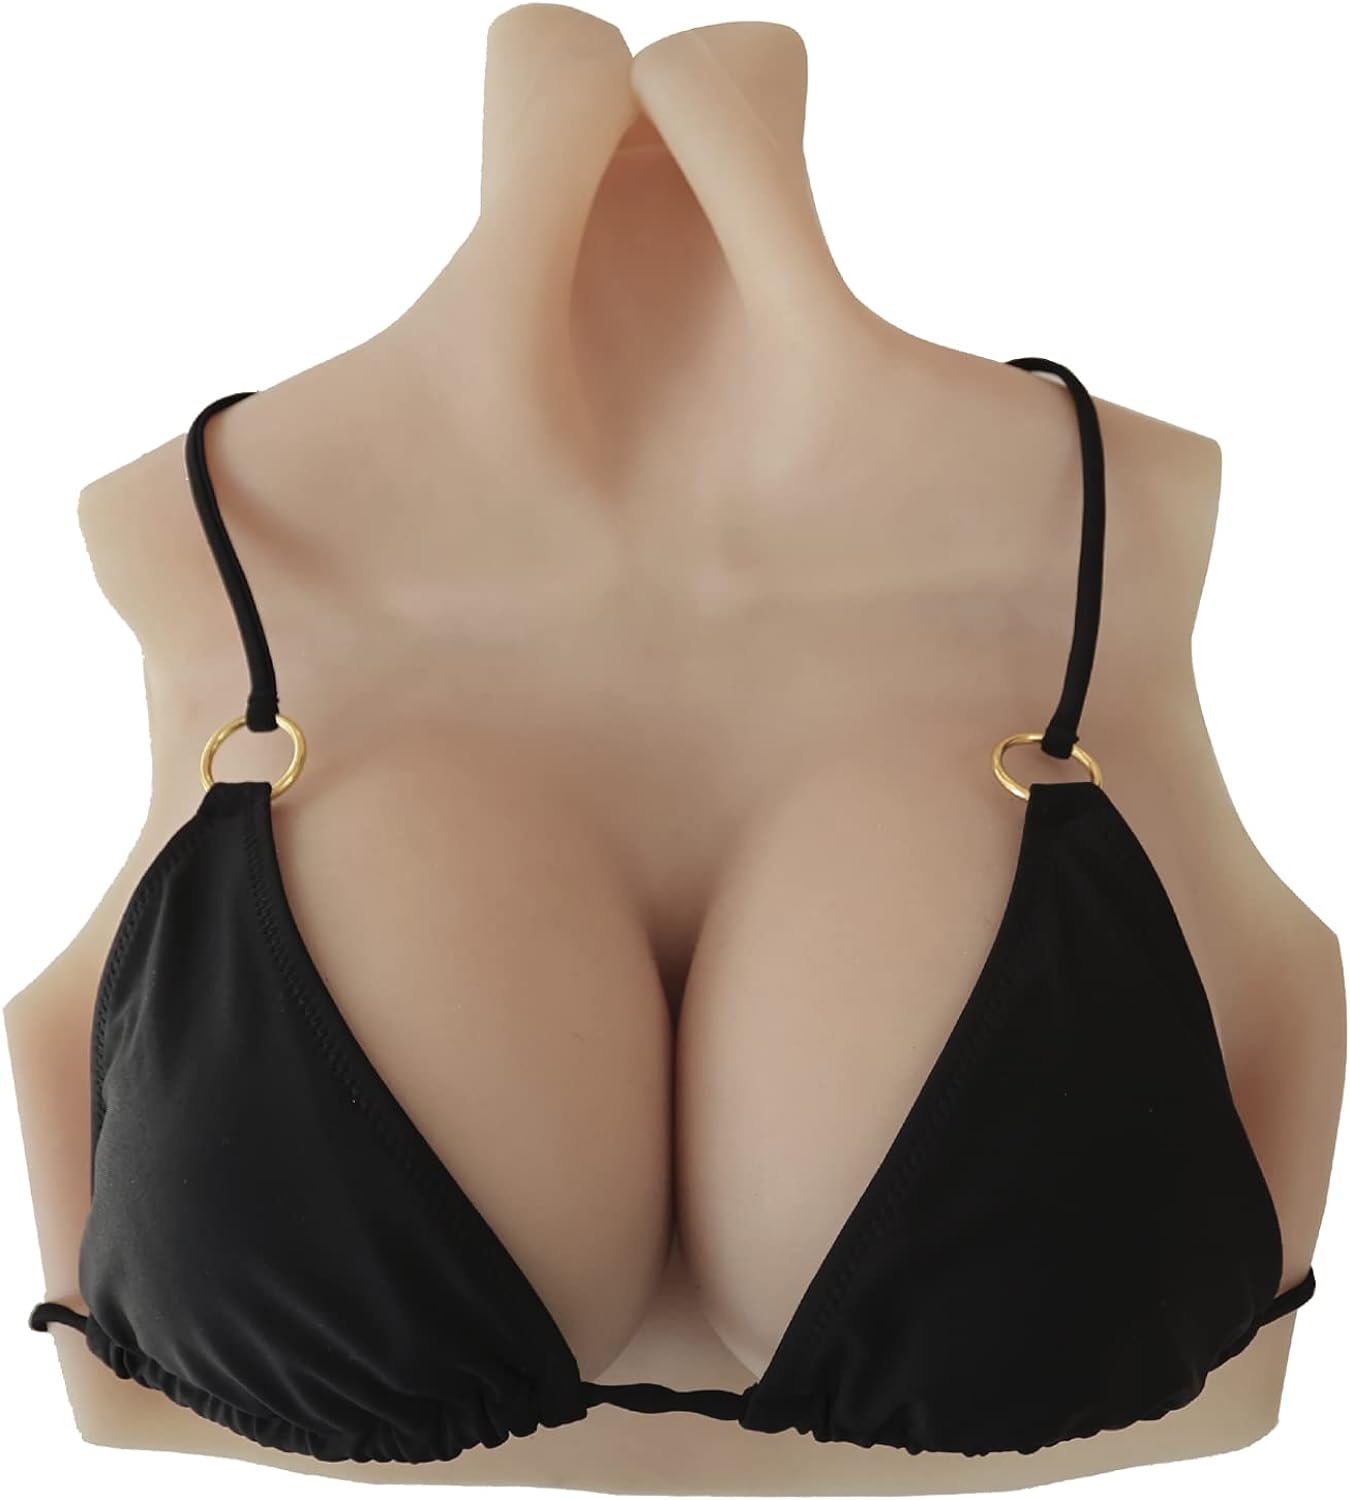 Caucasian Silicone Breast Forms Fake Boobs Hollow Back C Cup for Crossdressers